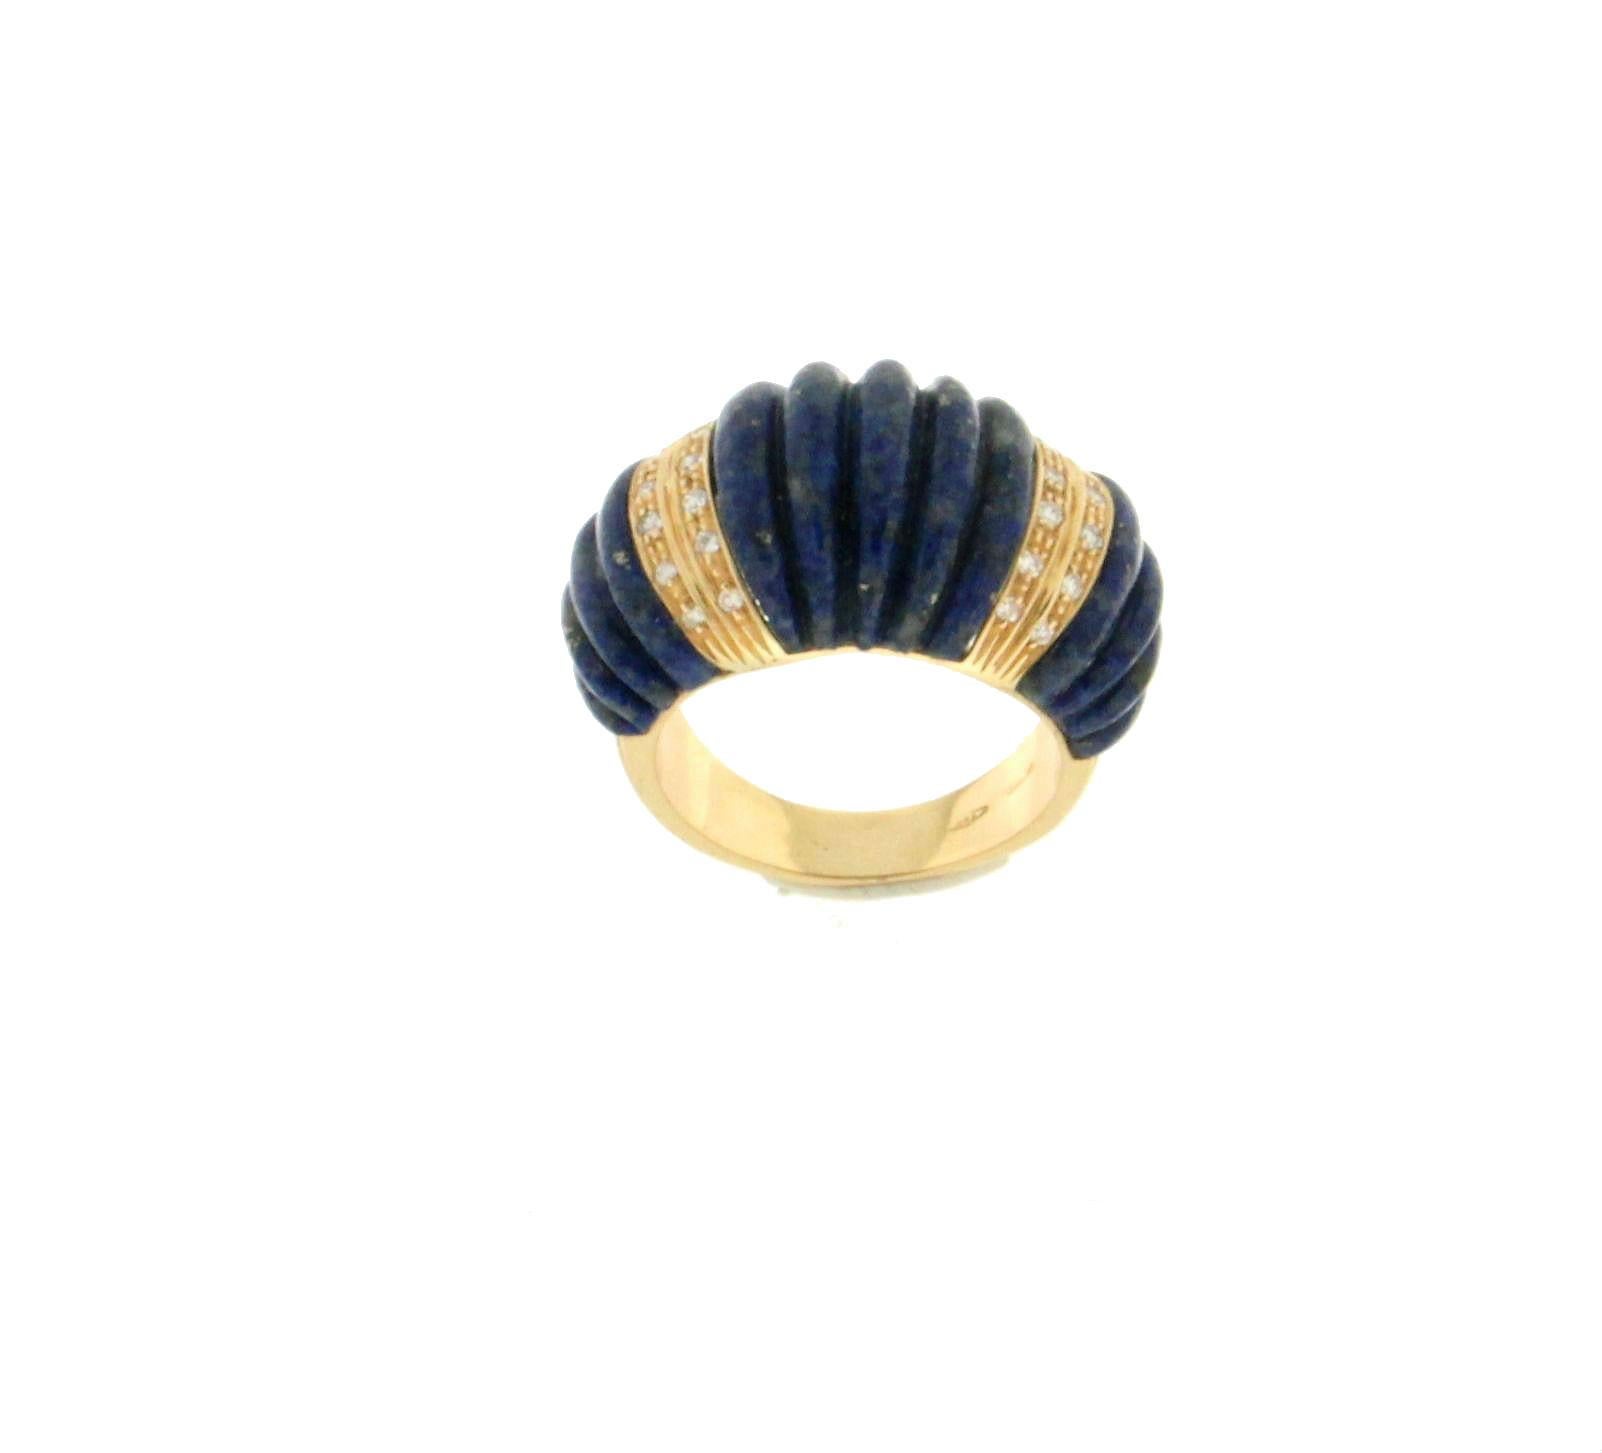 Handcraft Lapis Lazuli 18 Karat Yellow Gold Diamonds Cocktail Ring In New Condition For Sale In Marcianise, IT